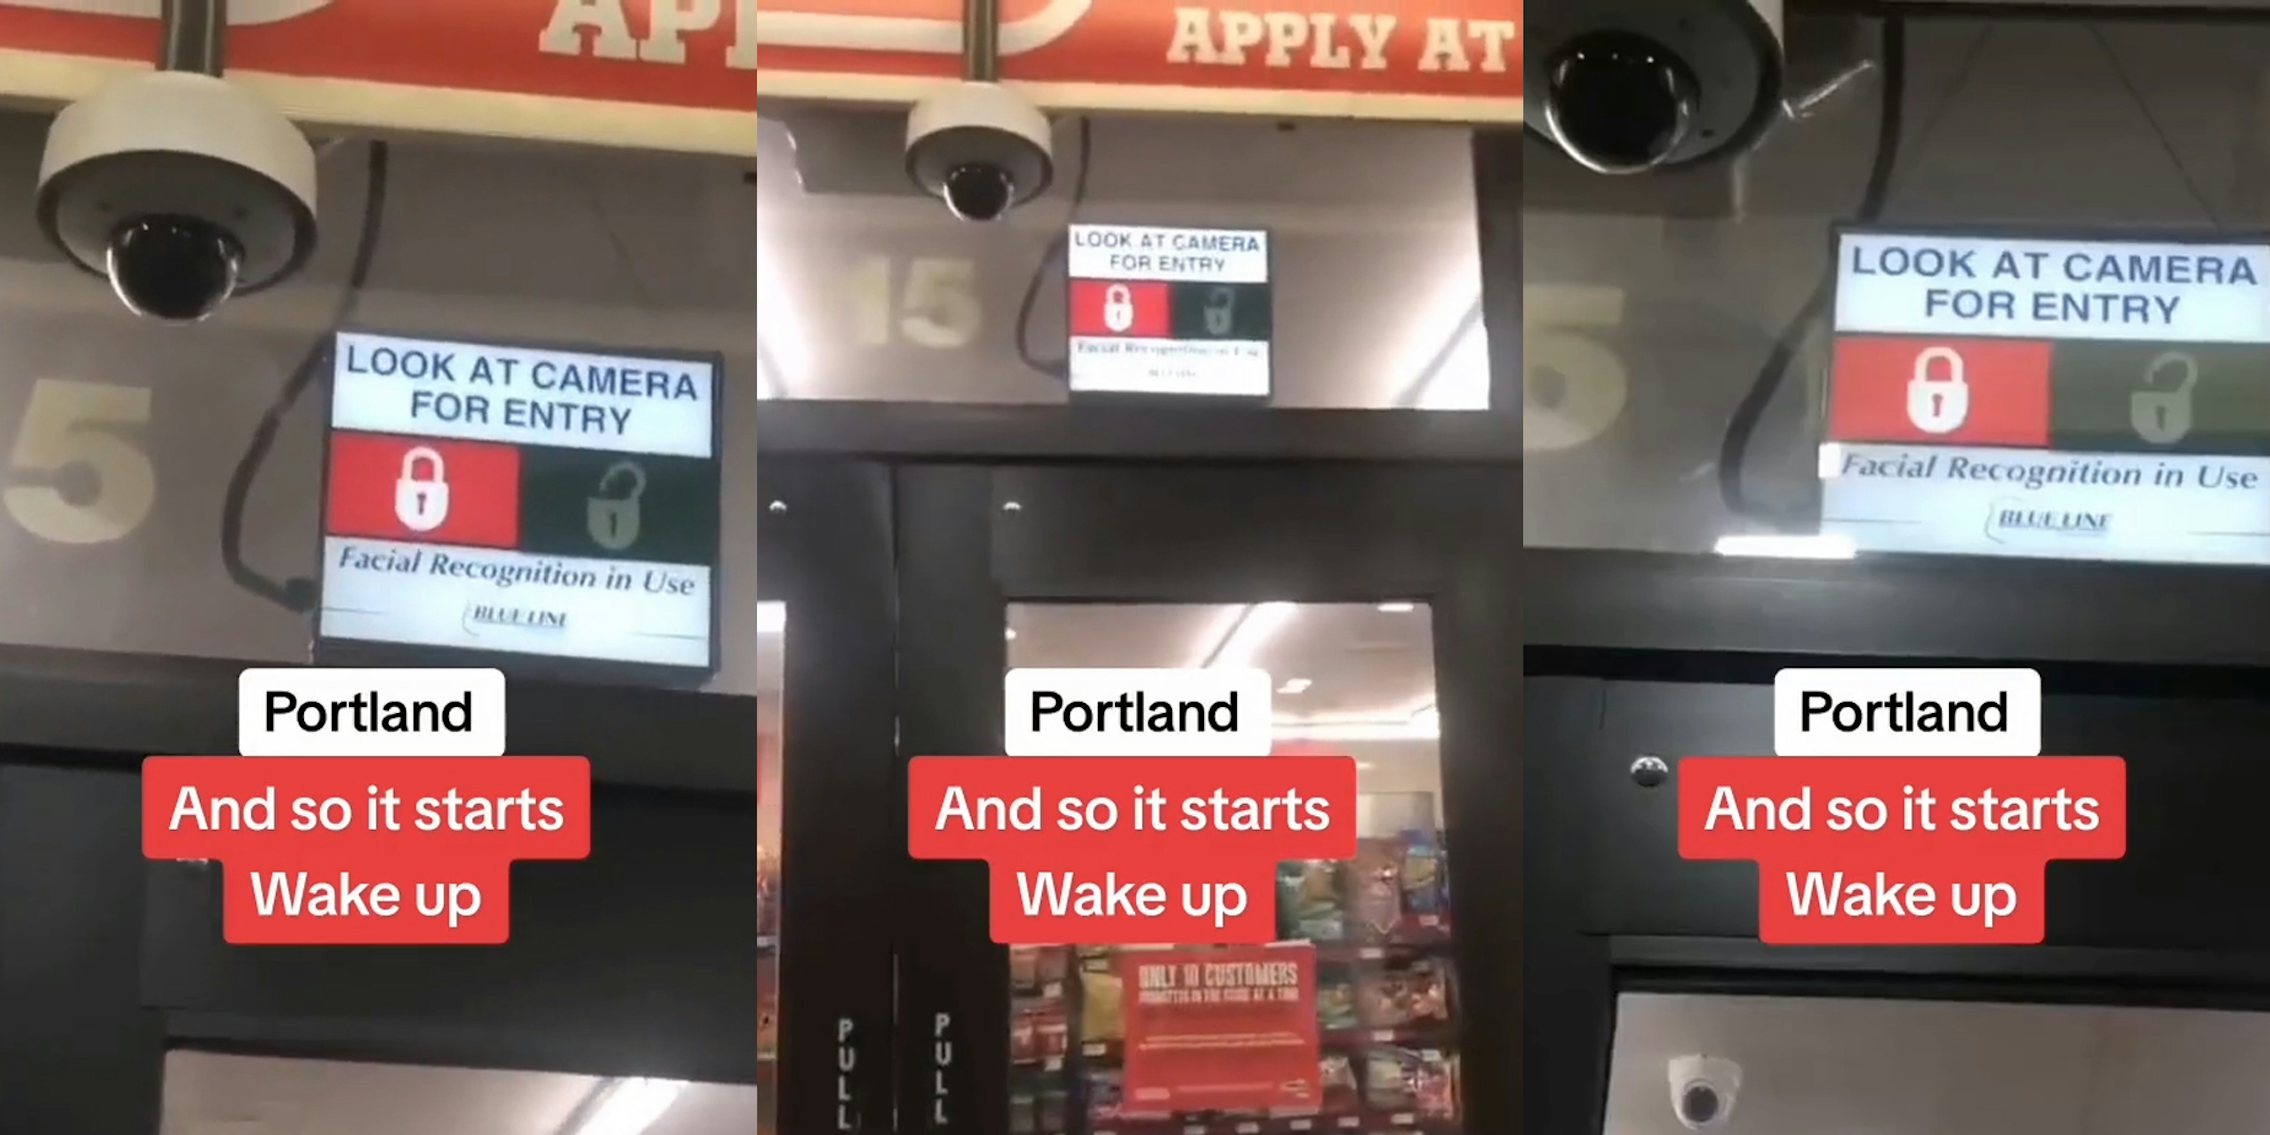 security camera with screen outside of store entrance with caption 'Portland And so it starts Wake up' (l) security camera with screen outside of store entrance with caption 'Portland And so it starts Wake up' (c) security camera with screen outside of store entrance with caption 'Portland And so it starts Wake up' (r)